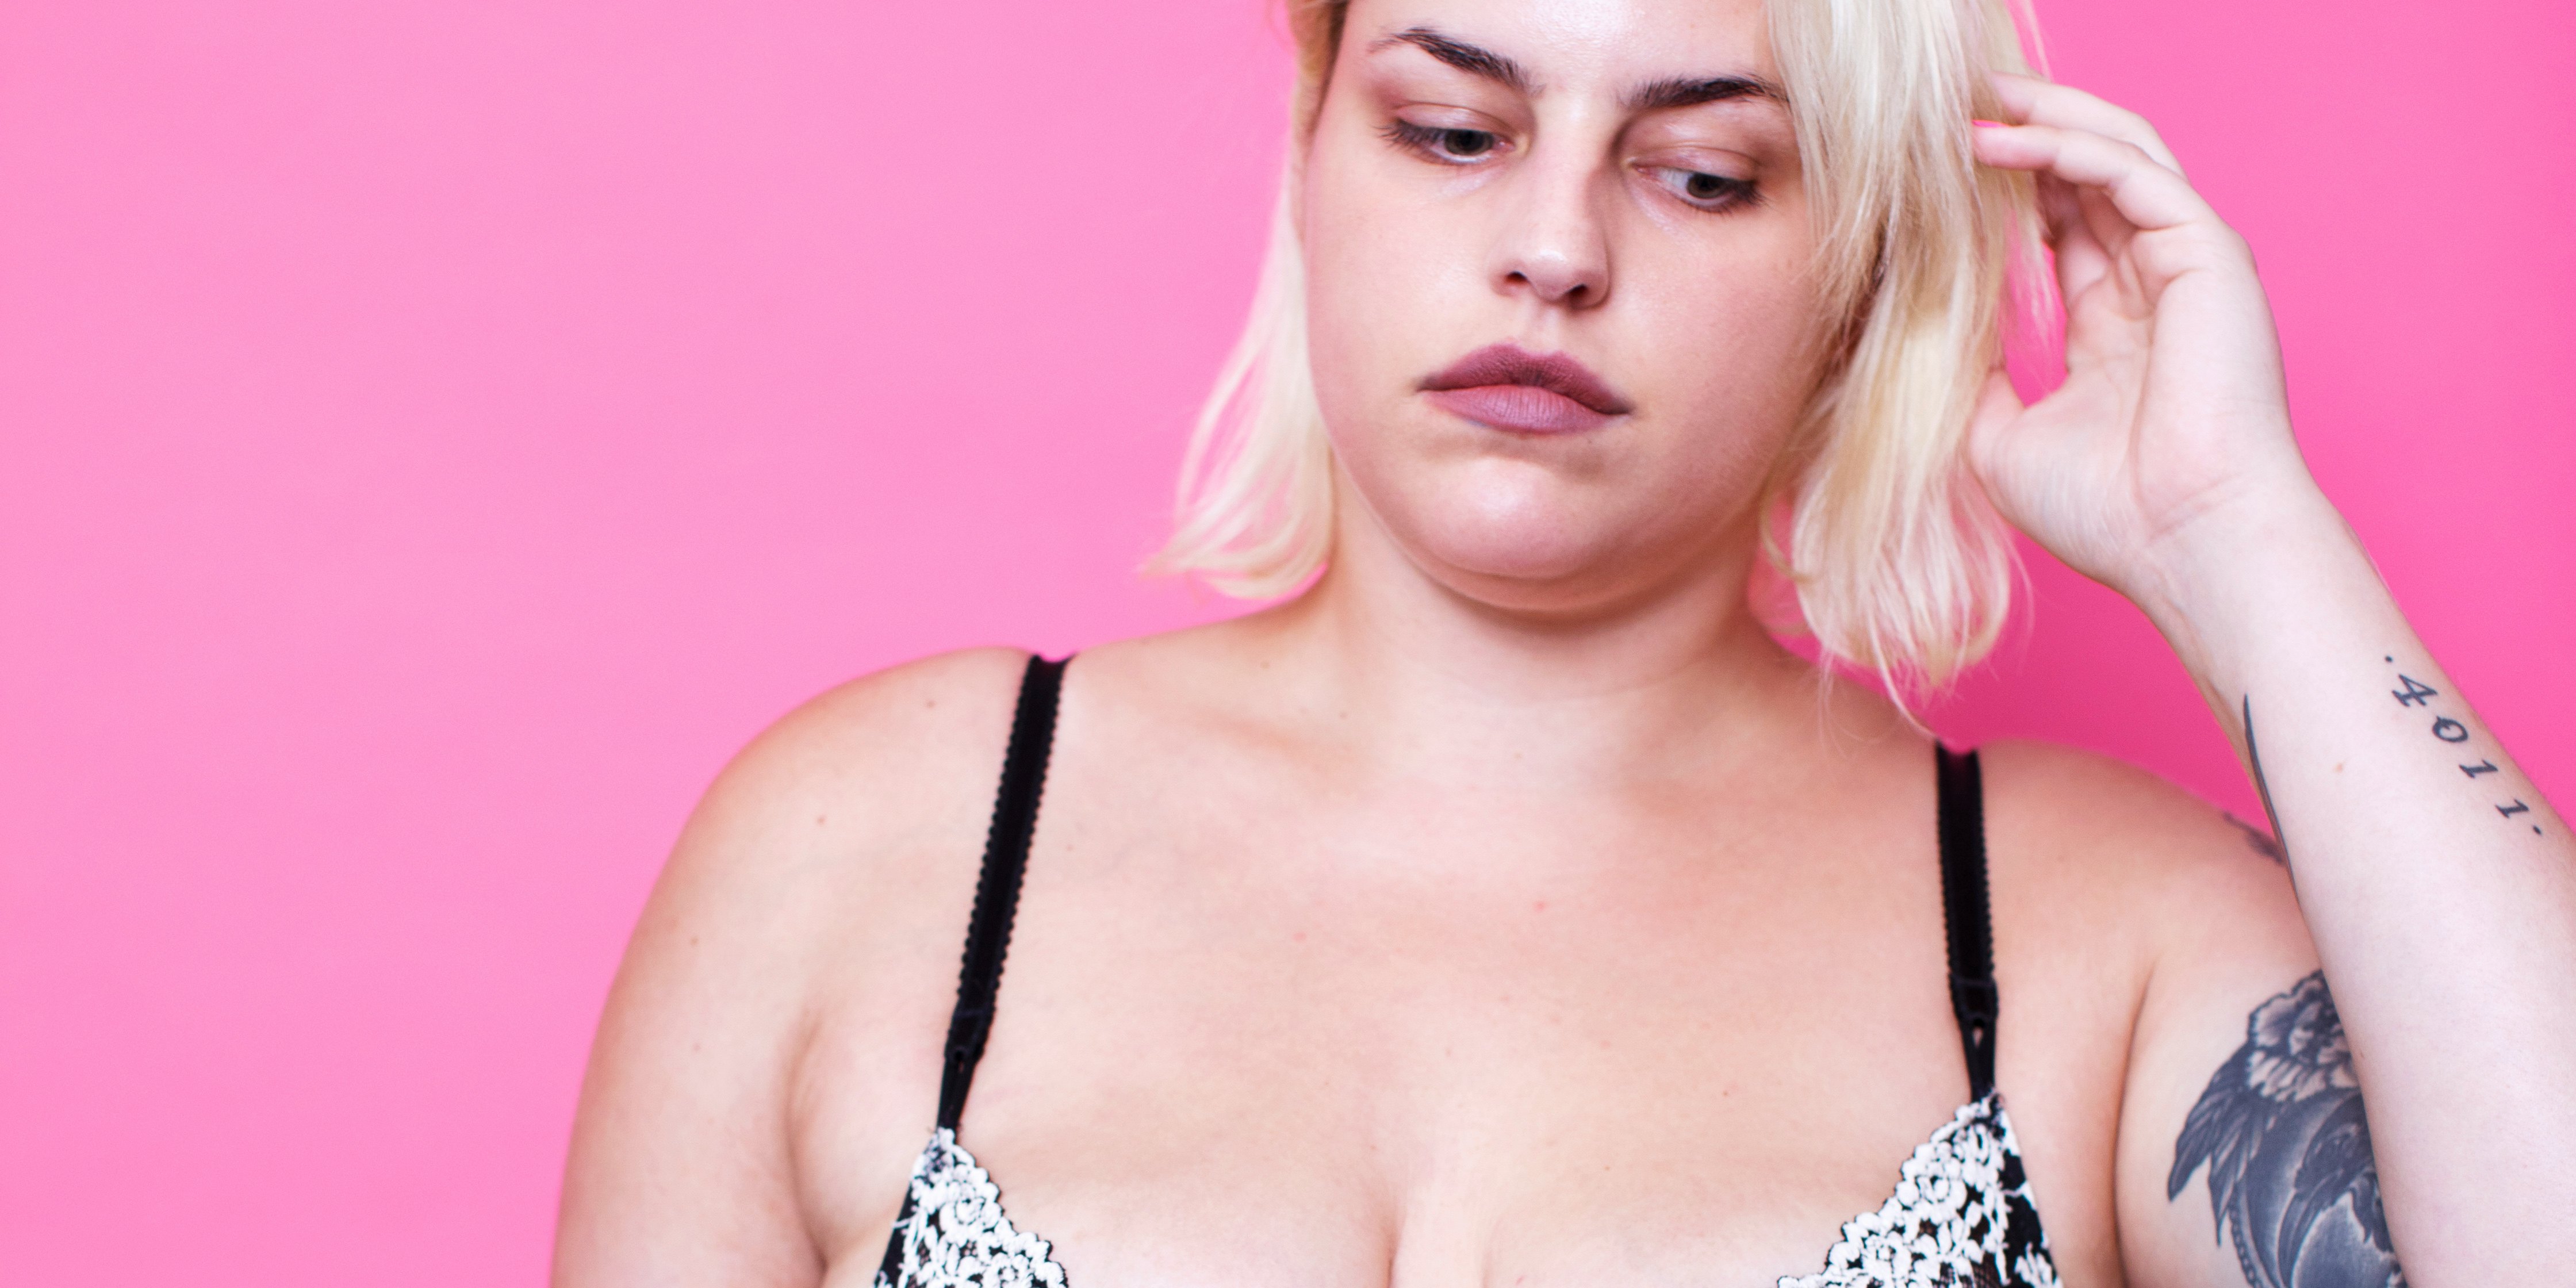 Women Who Cant Orgasm Reveal What Their Sex Lives Are Really Like image